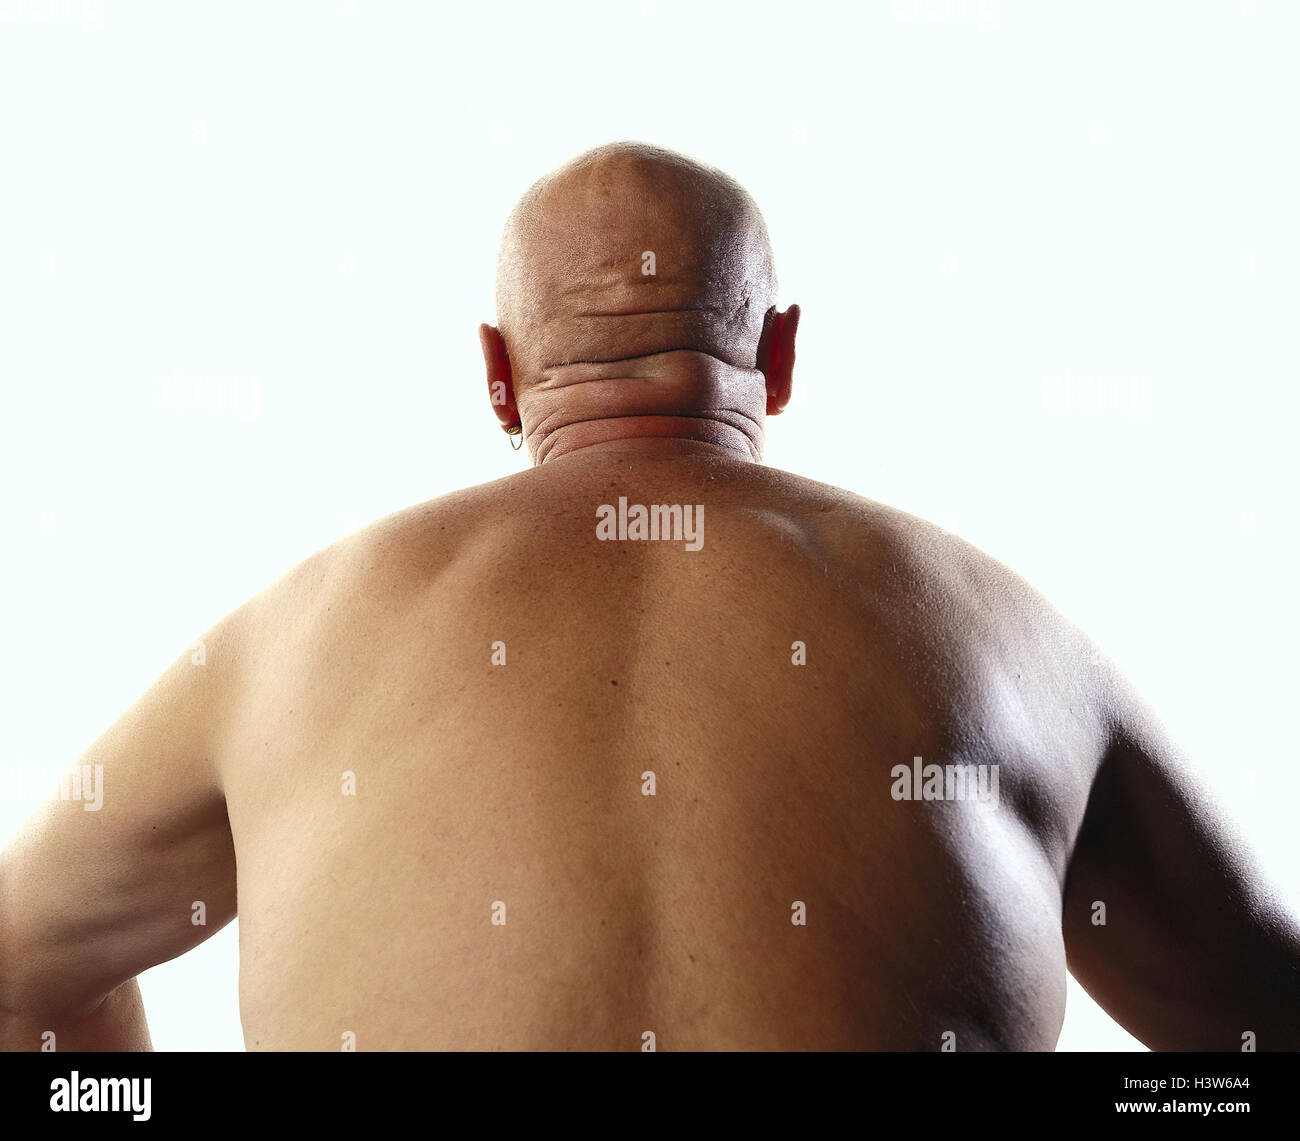 https://c8.alamy.com/comp/H3W6A4/man-thickly-bald-head-free-upper-part-of-the-body-back-view-inside-H3W6A4.jpg